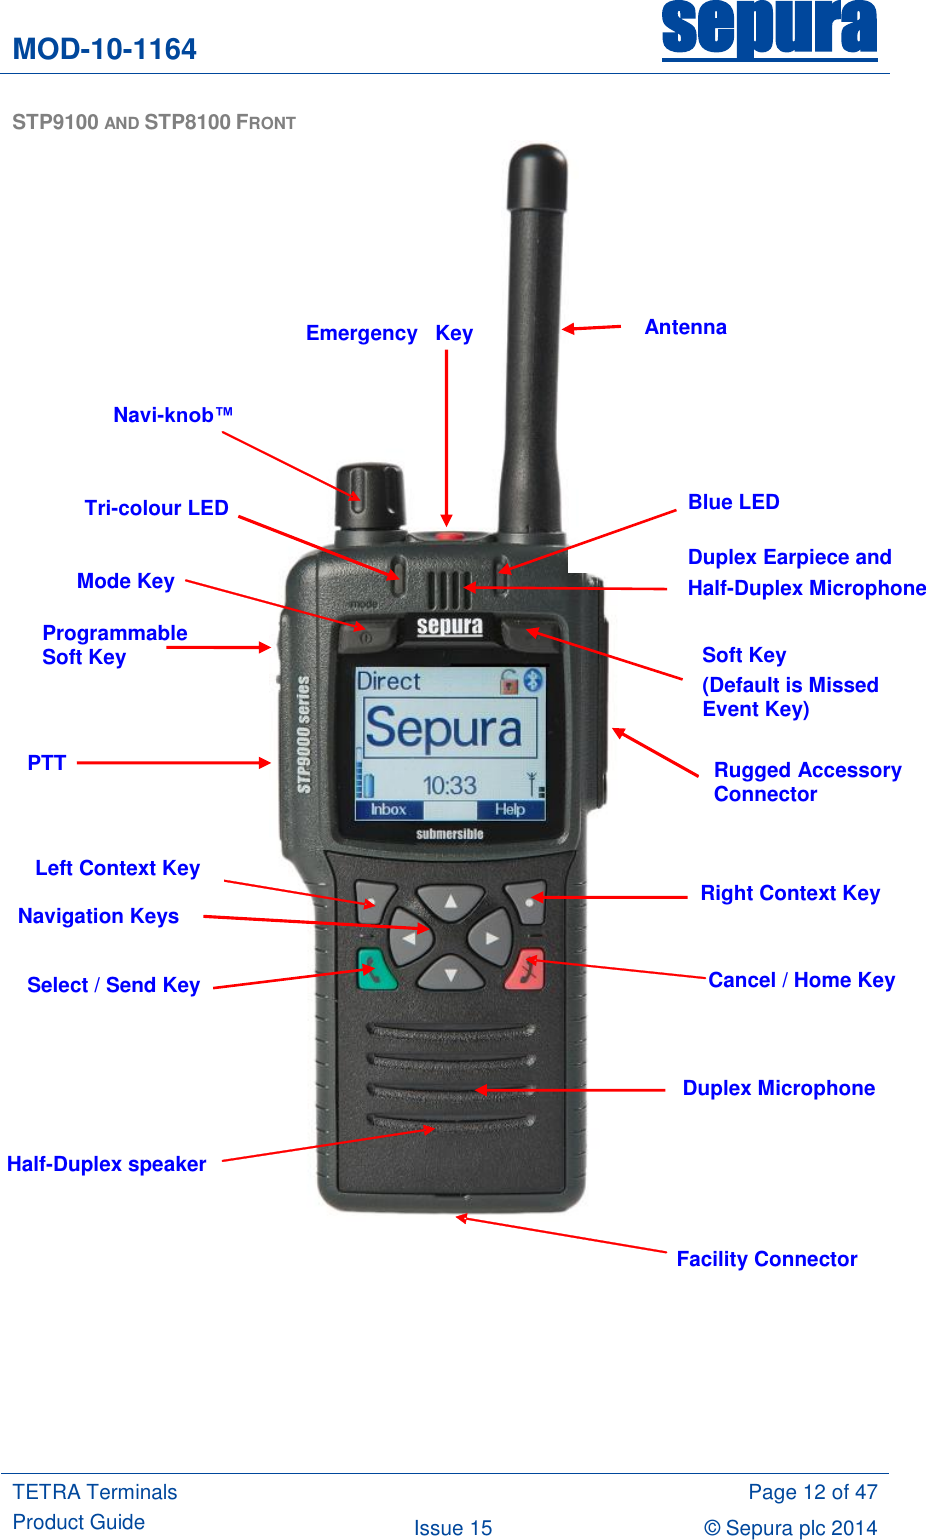 MOD-10-1164 sepura  TETRA Terminals Product Guide  Page 12 of 47 Issue 15 © Sepura plc 2014   STP9100 AND STP8100 FRONT        Emergency   Key  Navi-knob™  Mode Key PTT  Navigation Keys Select / Send Key Duplex Earpiece and  Half-Duplex Microphone  - Cancel / Home Key   Half-Duplex speaker  Facility Connector Duplex Microphone Blue LED Antenna Left Context Key Right Context Key Programmable Soft Key  Tri-colour LED Soft Key (Default is Missed Event Key) Rugged Accessory Connector 